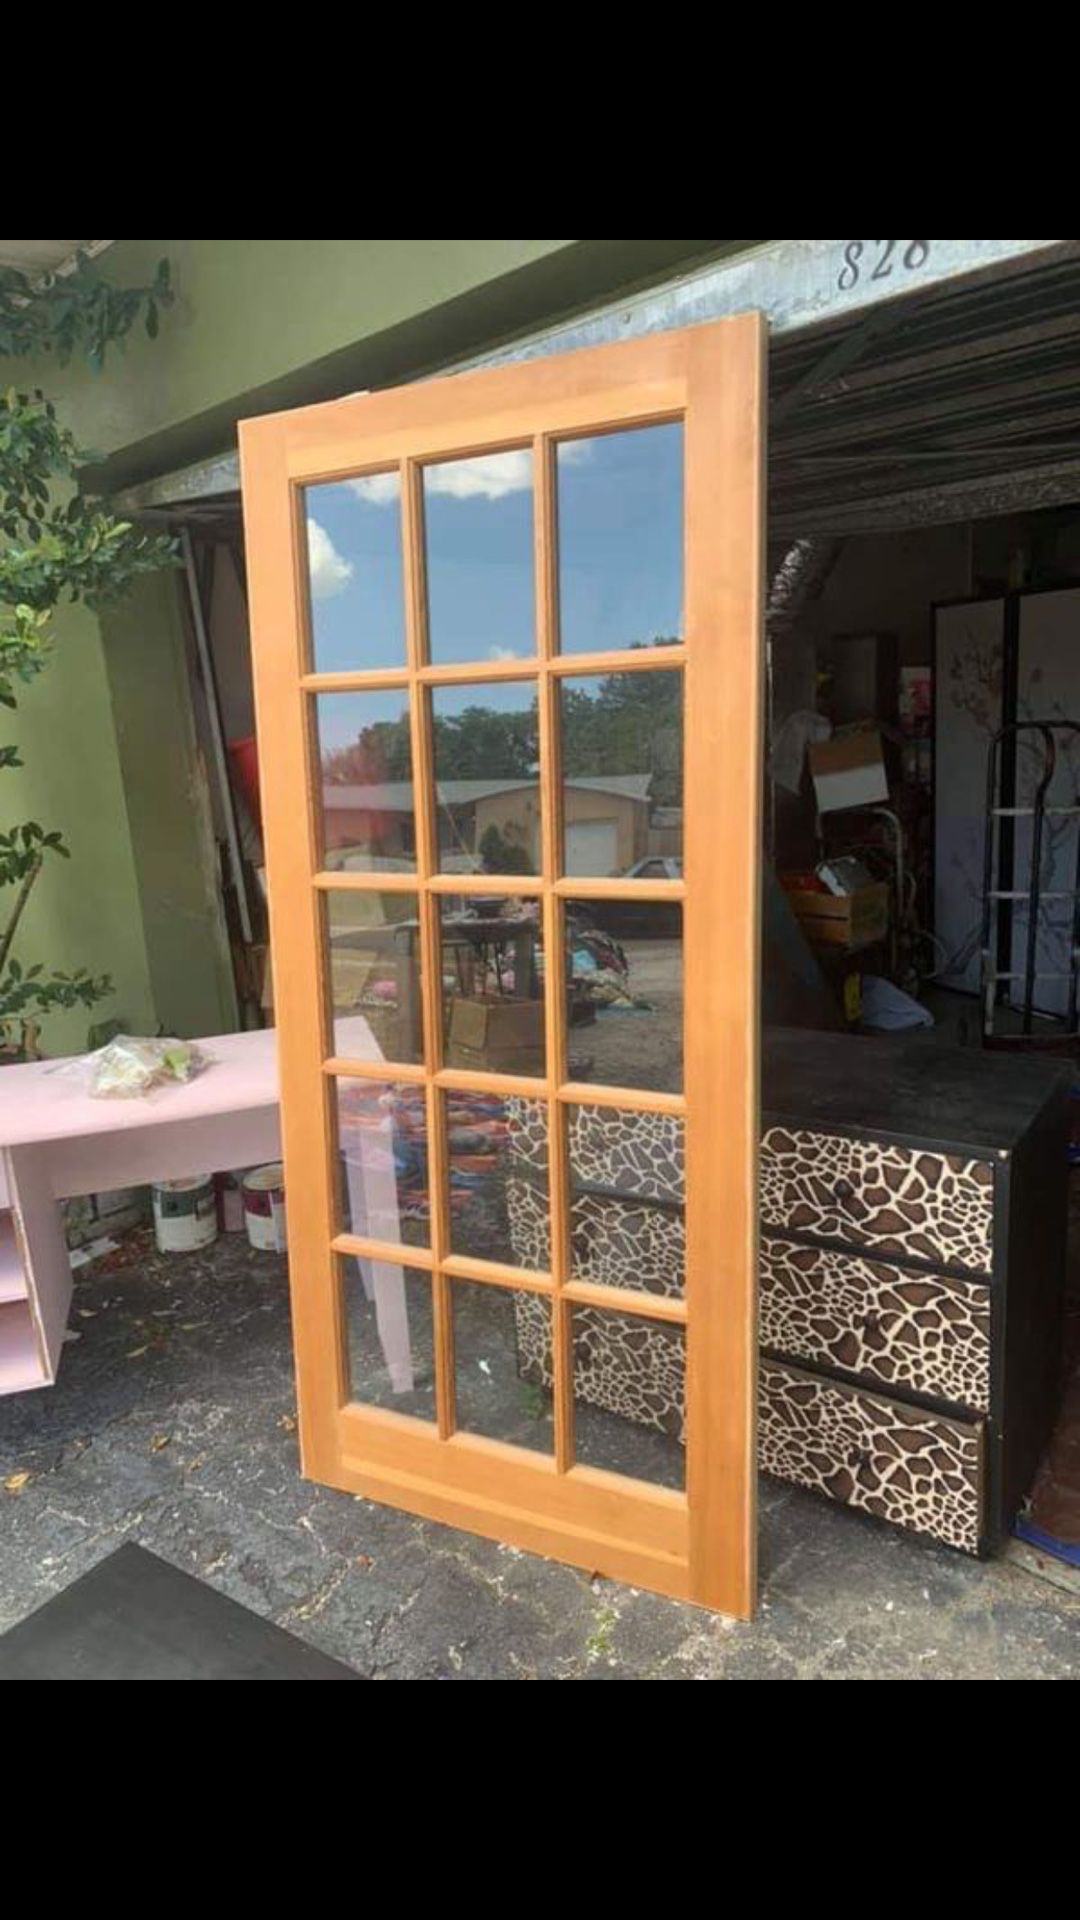 Rogue Valley French Door 77.5” x 36” Good Condition, only there’s a few screw holes in doors We have two doors available $100 each